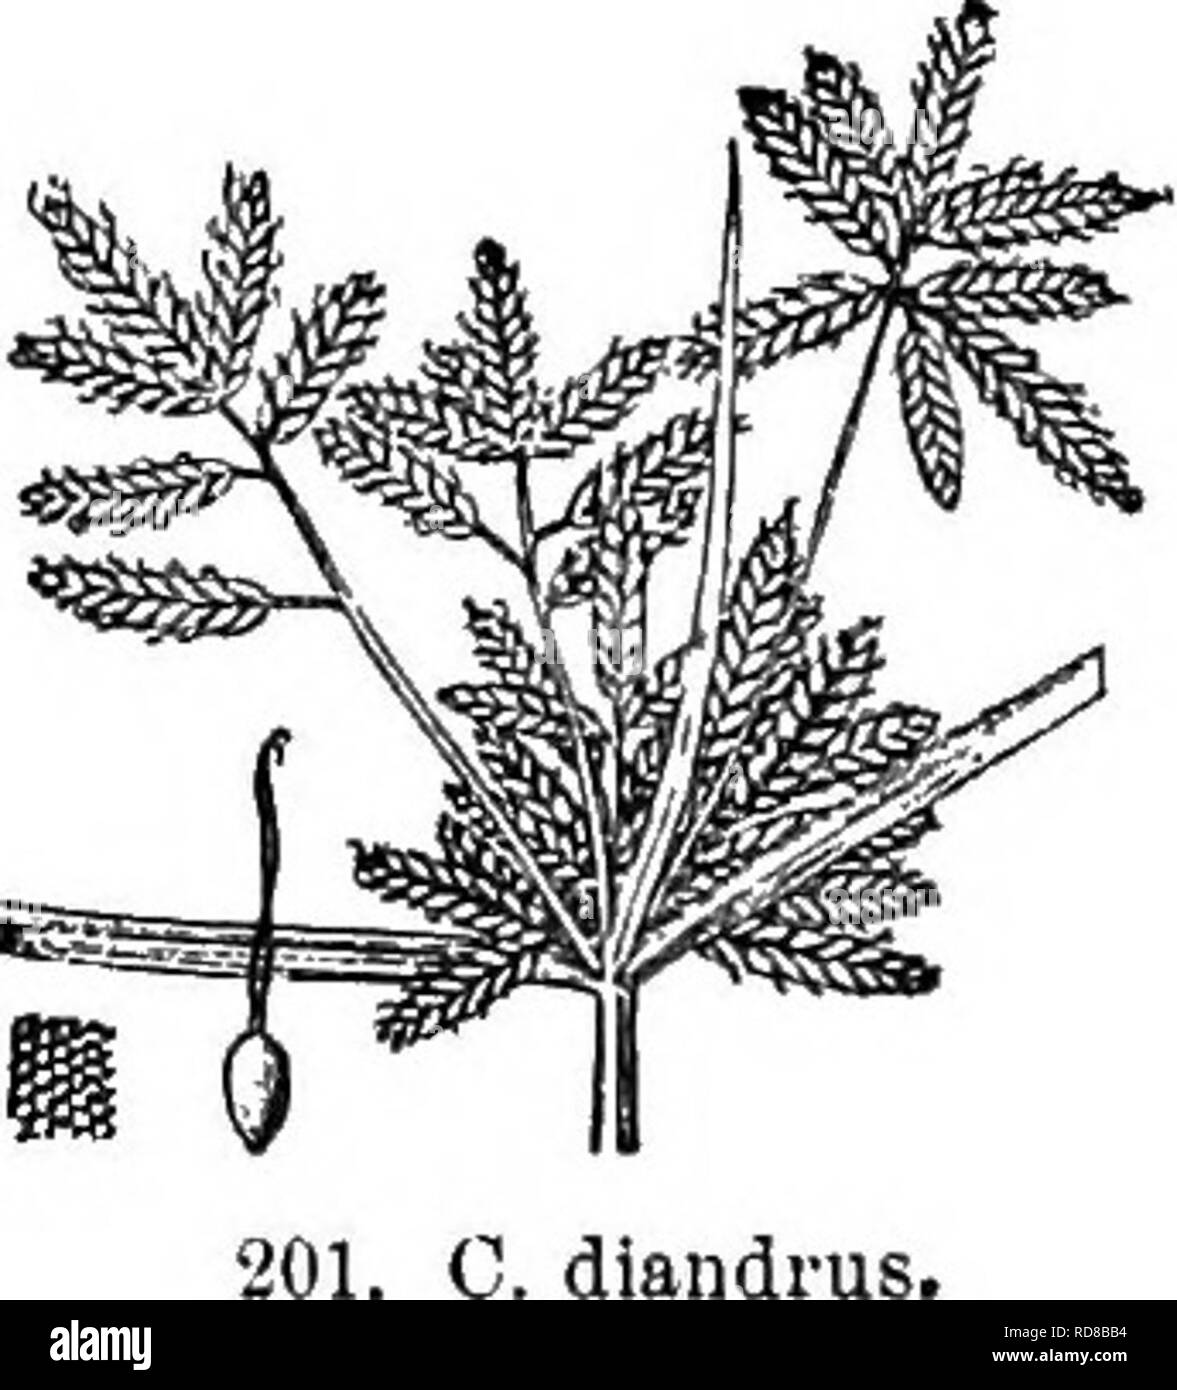 . Gray's new manual of botany. A handbook of the flowering plants and ferns of the central and northeastern United States and adjacent Canada. Botany. 'iOO C. Havescens.. 1. C. flavfiscens L. Culms 0.5-4 dm. high ; involucre 3-leaved, very unequal; spikelets 0.5-1.5 cm. long, 1.5-2.5 mm. broad, becoming linear, obtuse, clustered on the 2-4 very short rays ; scales ob- tuse, straw-yellow ; stamens 3 ; achene shining, orbicular, its superficial cells oblong. —Low grounds, N. Y. to Mich., 111., and southw. (Eurasia, Afr., Trop. Am.) Fig. 200. 2. C. diiindrus Terr. Simi- lar ; spikelets lance-oblo Stock Photo